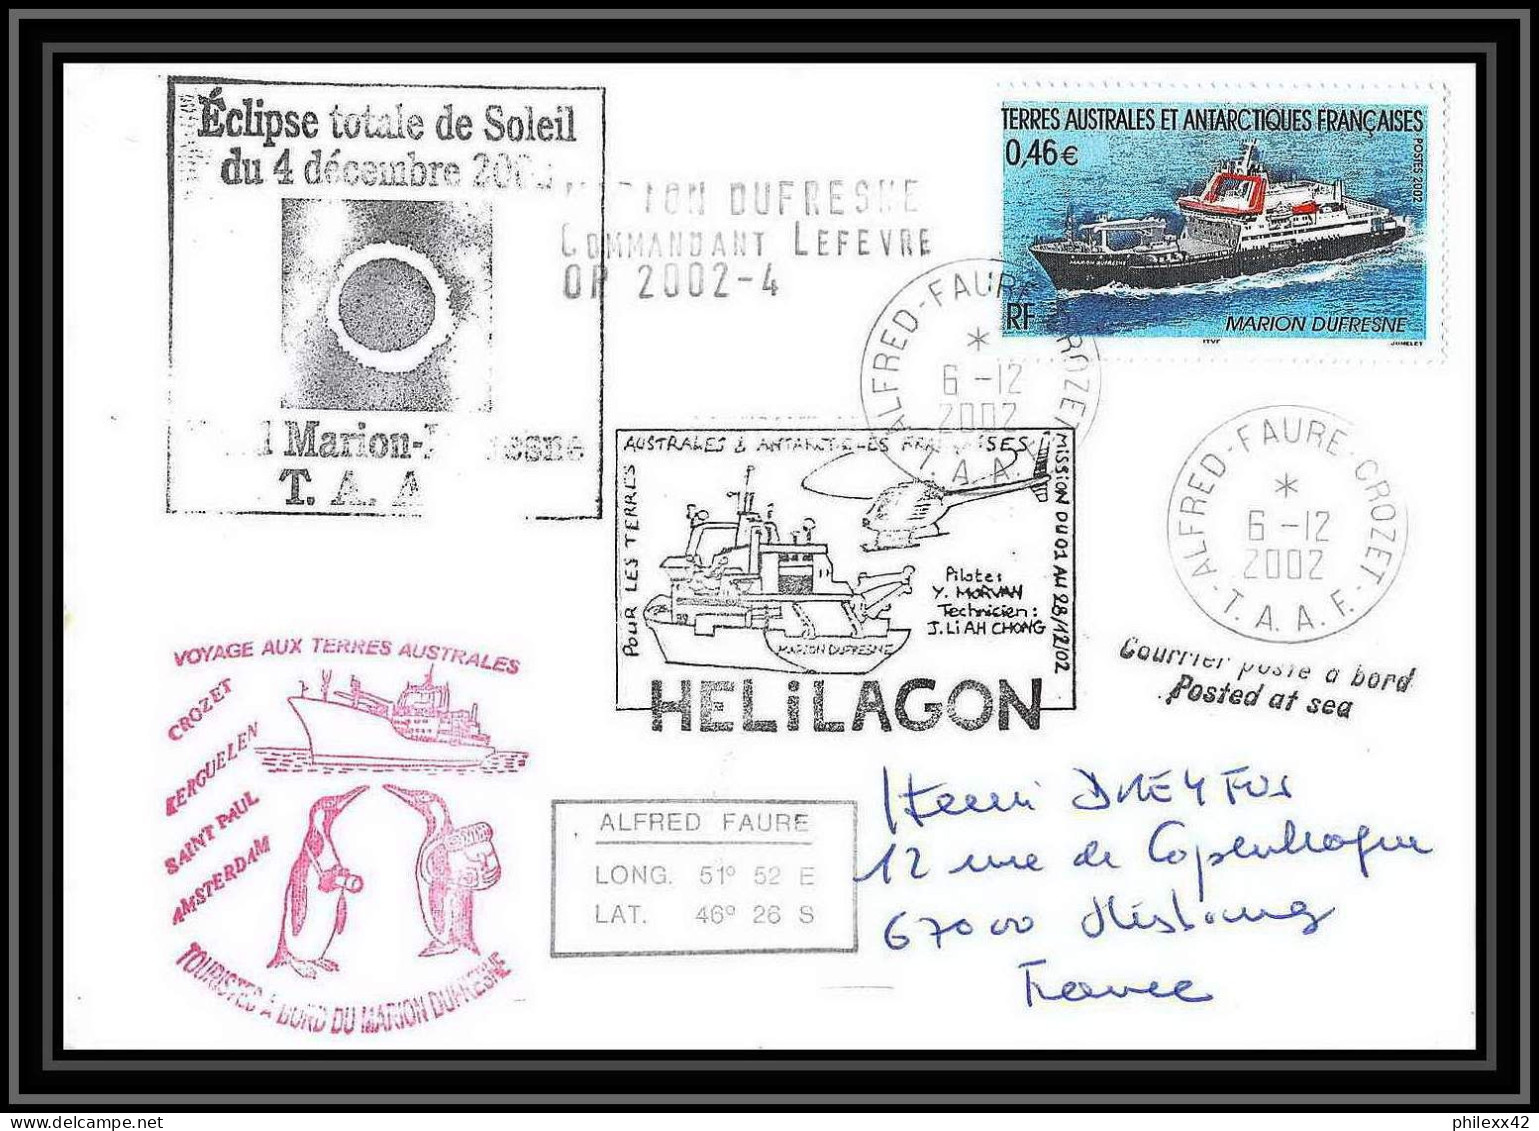 2386 ANTARCTIC Terres Australes TAAF Lettre Cover Dufresne 2 N°330 Helilagon Signé Signed Op 2002/4 6/12/2002 - Expéditions Antarctiques